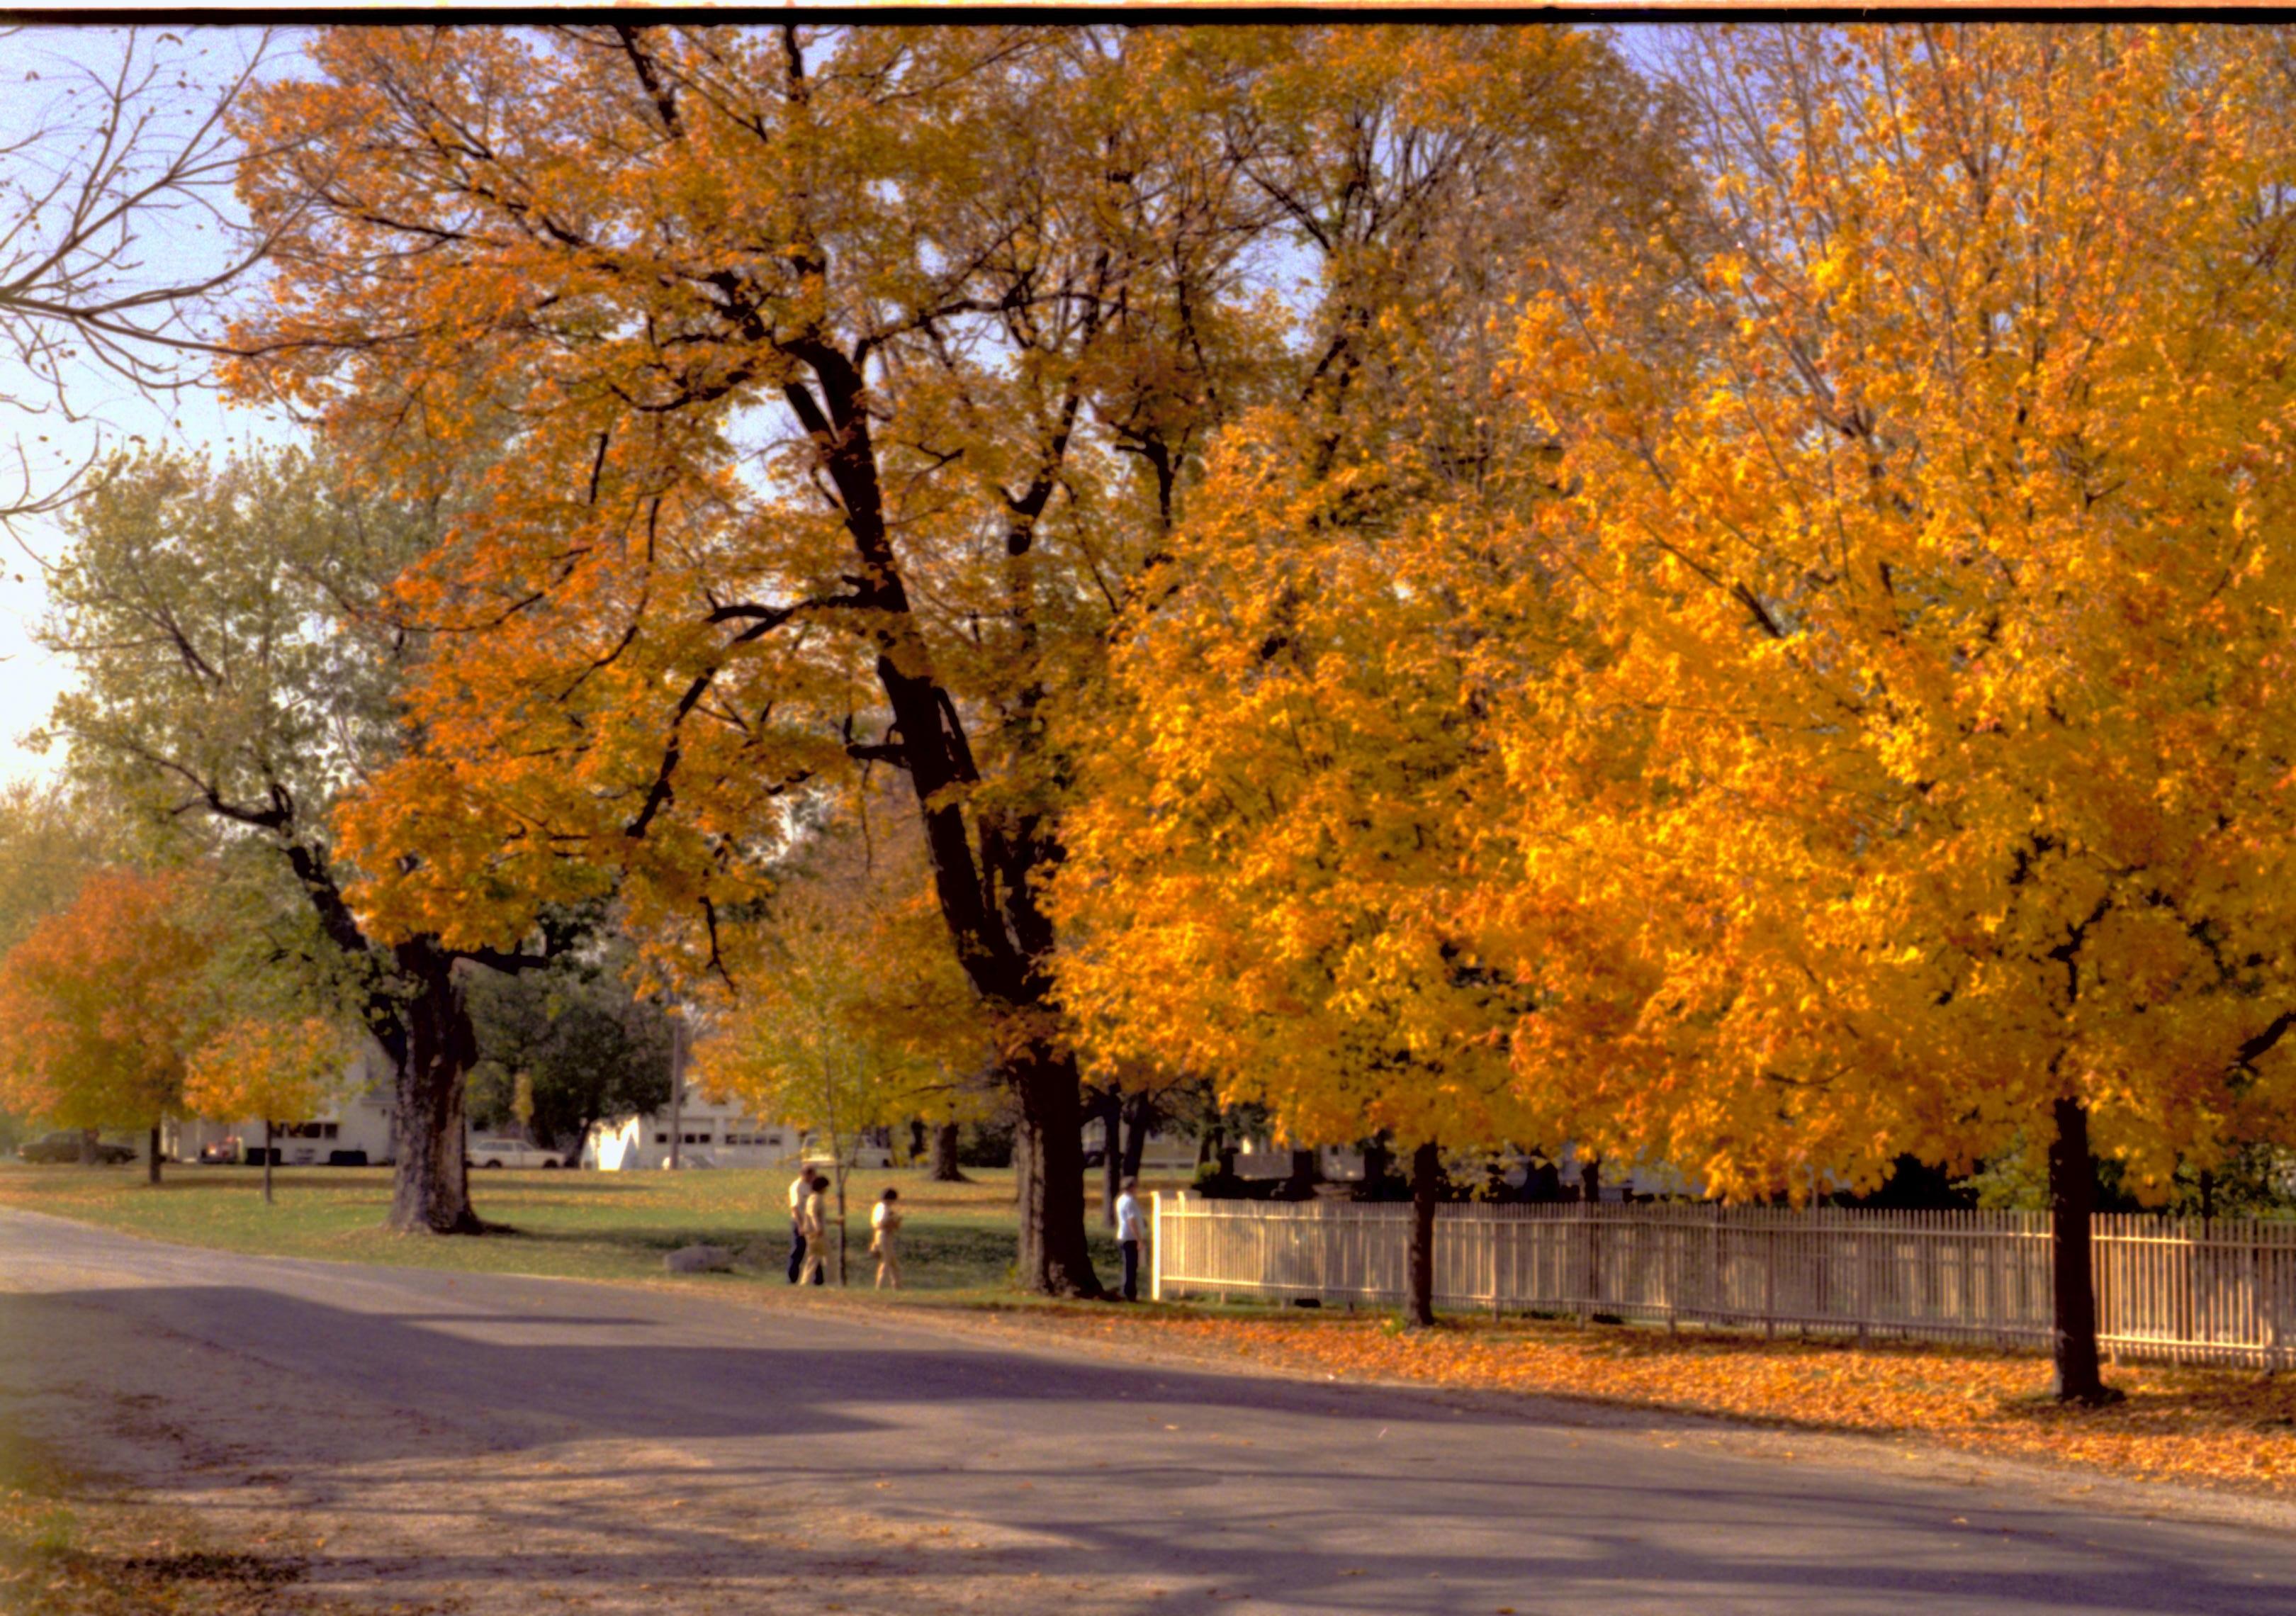 NA Lincoln Home NHS- Christmas in Licoln Neighborhood 1989, 8488, 143A, 25 trees, color, fall